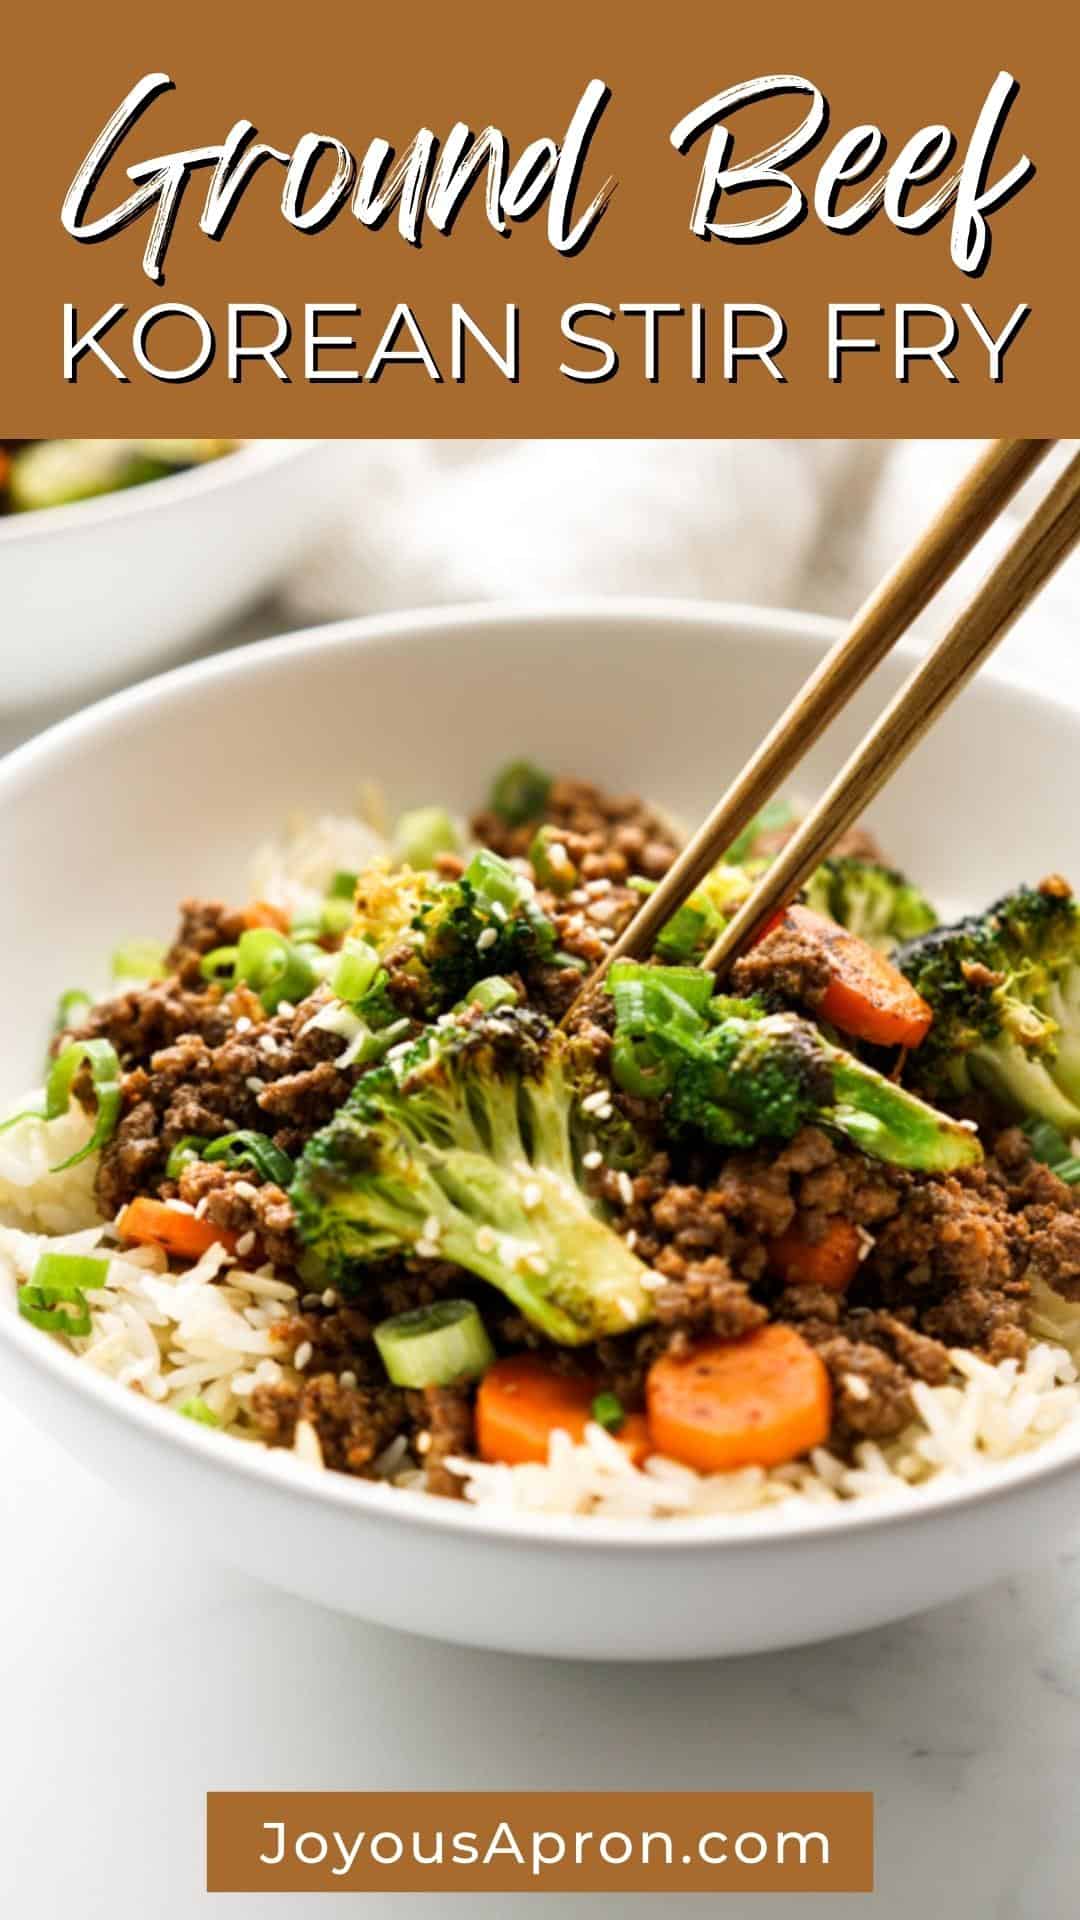 Korean Ground Beef Stir Fry - easy Ground Beef Stir Fry recipe for a quick and yummy dinner! Ground lean beef, broccoli, carrots, garlic tossed in a bold-flavored zesty, savory and sweet Korean inspired sauce. via @joyousapron